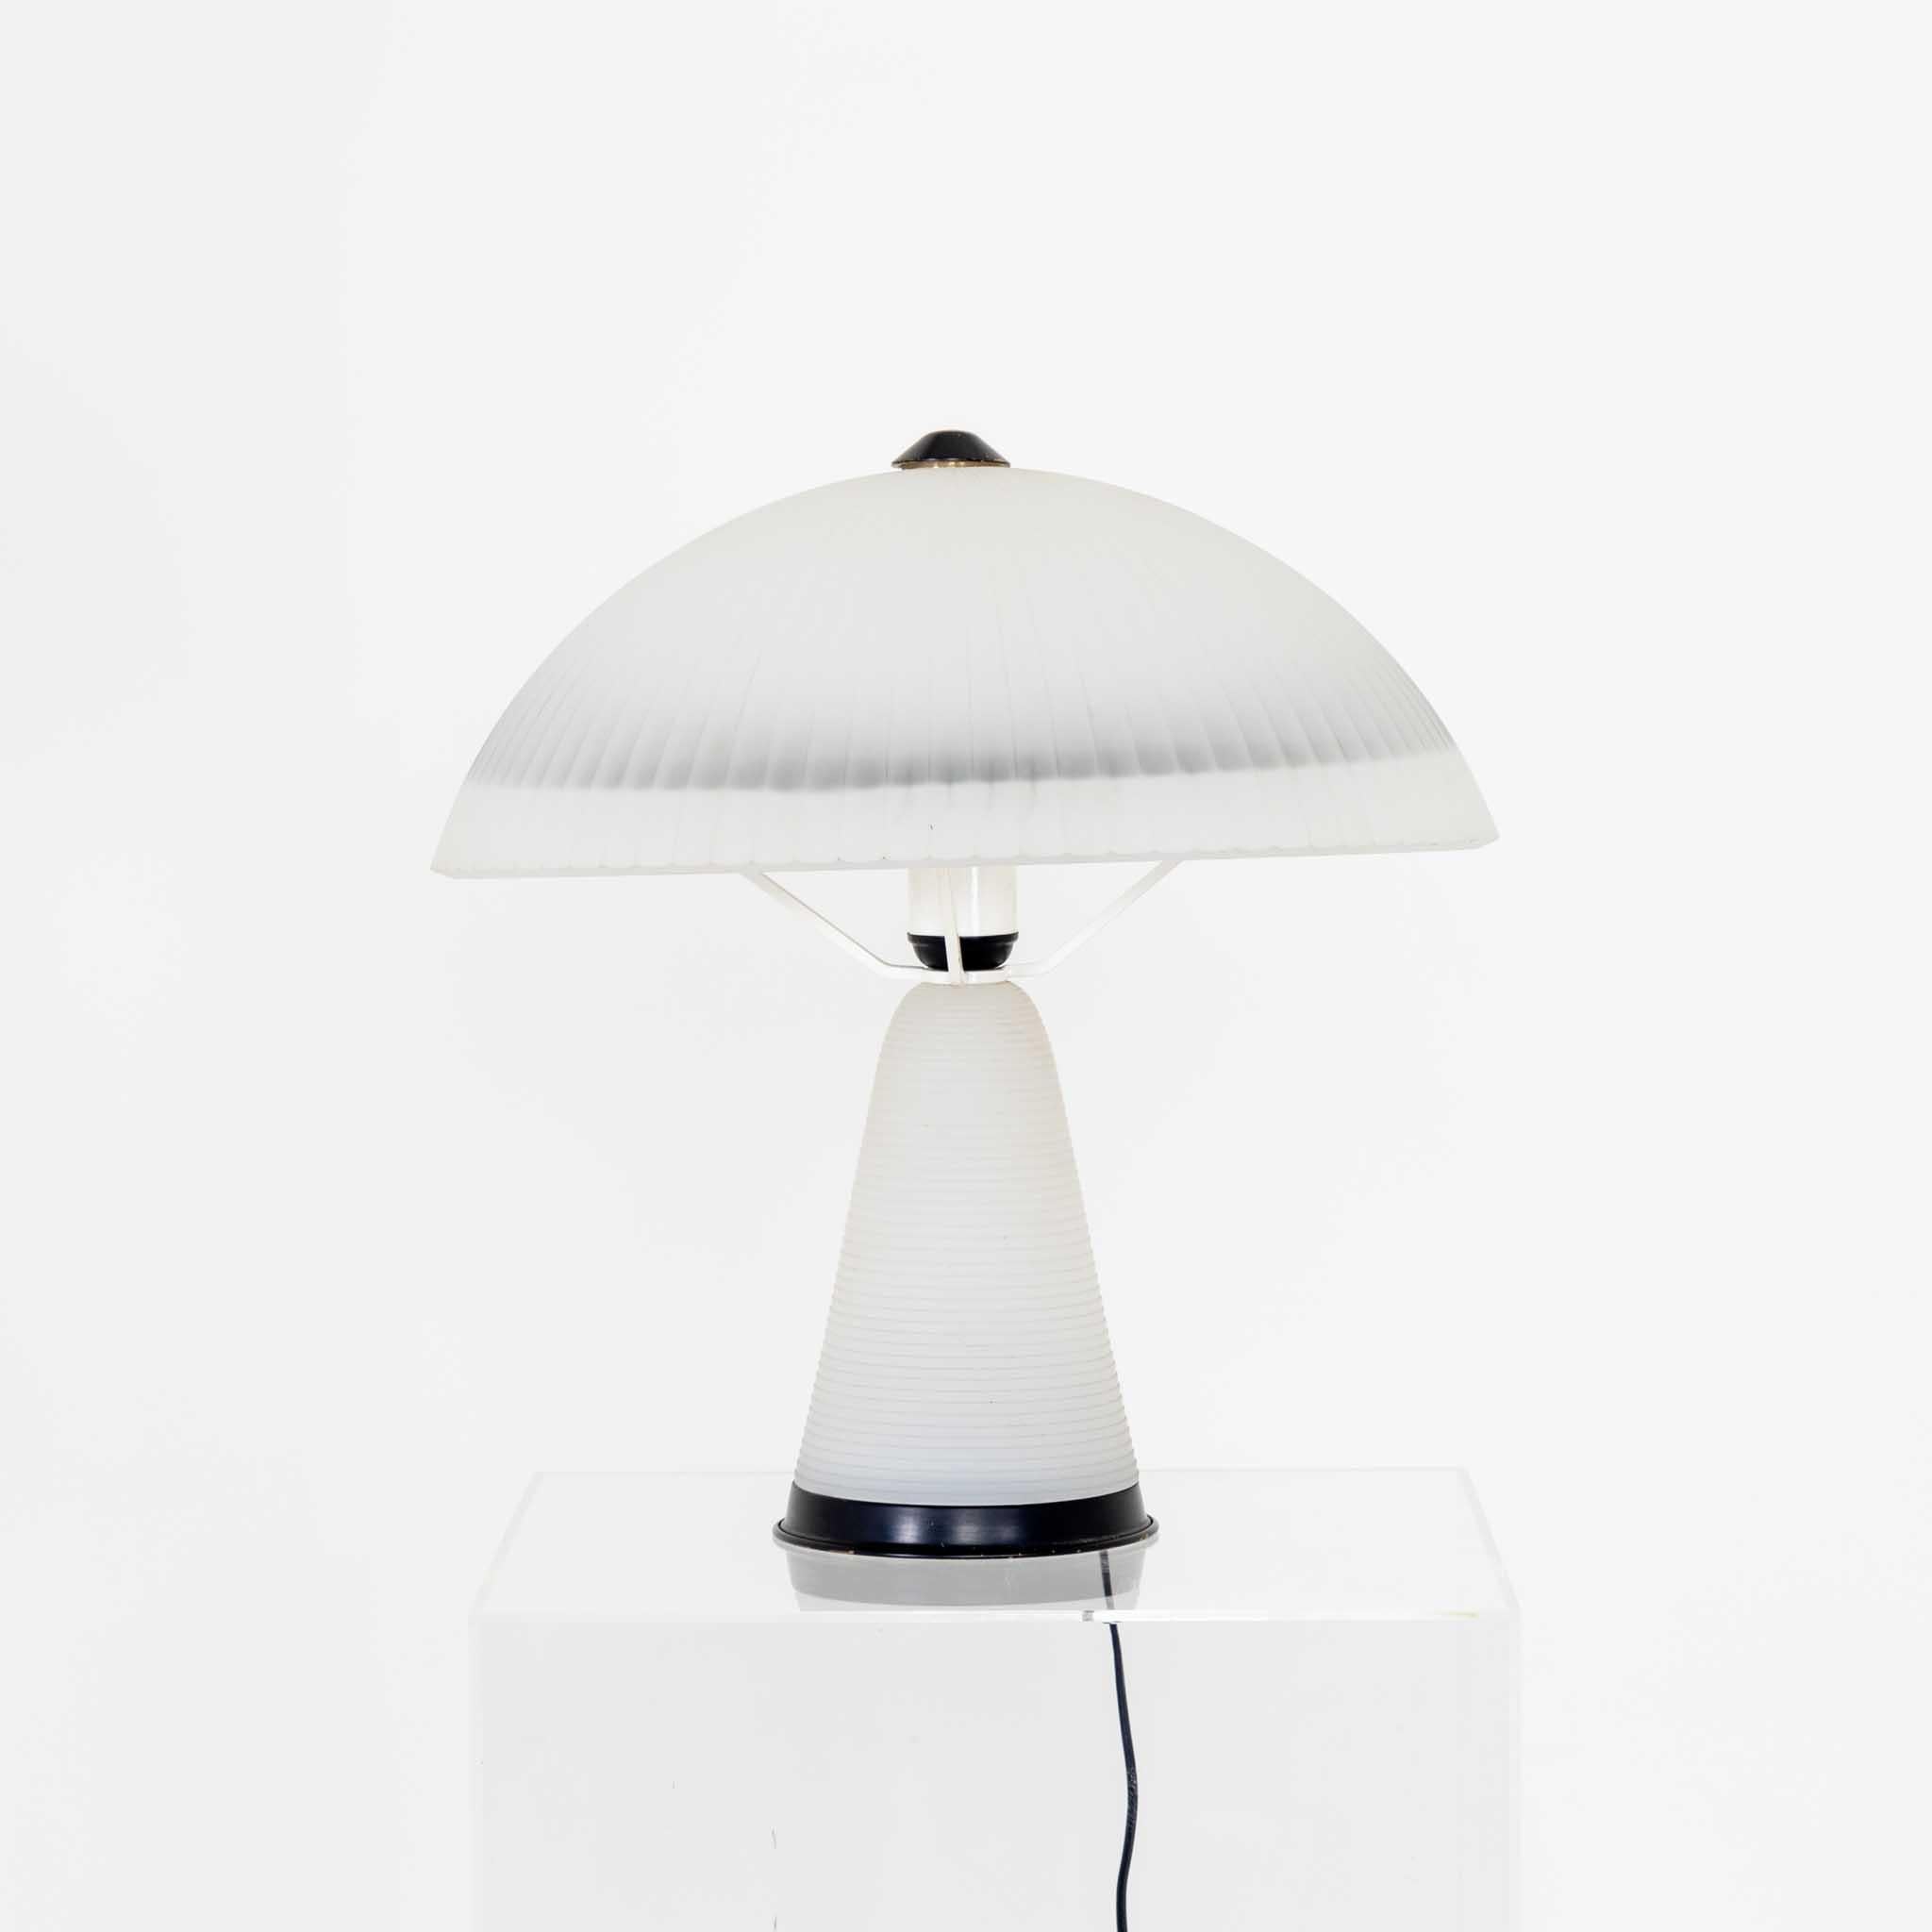 Mushroom shaped table lamp made of wavy opaque glass with black mounts.